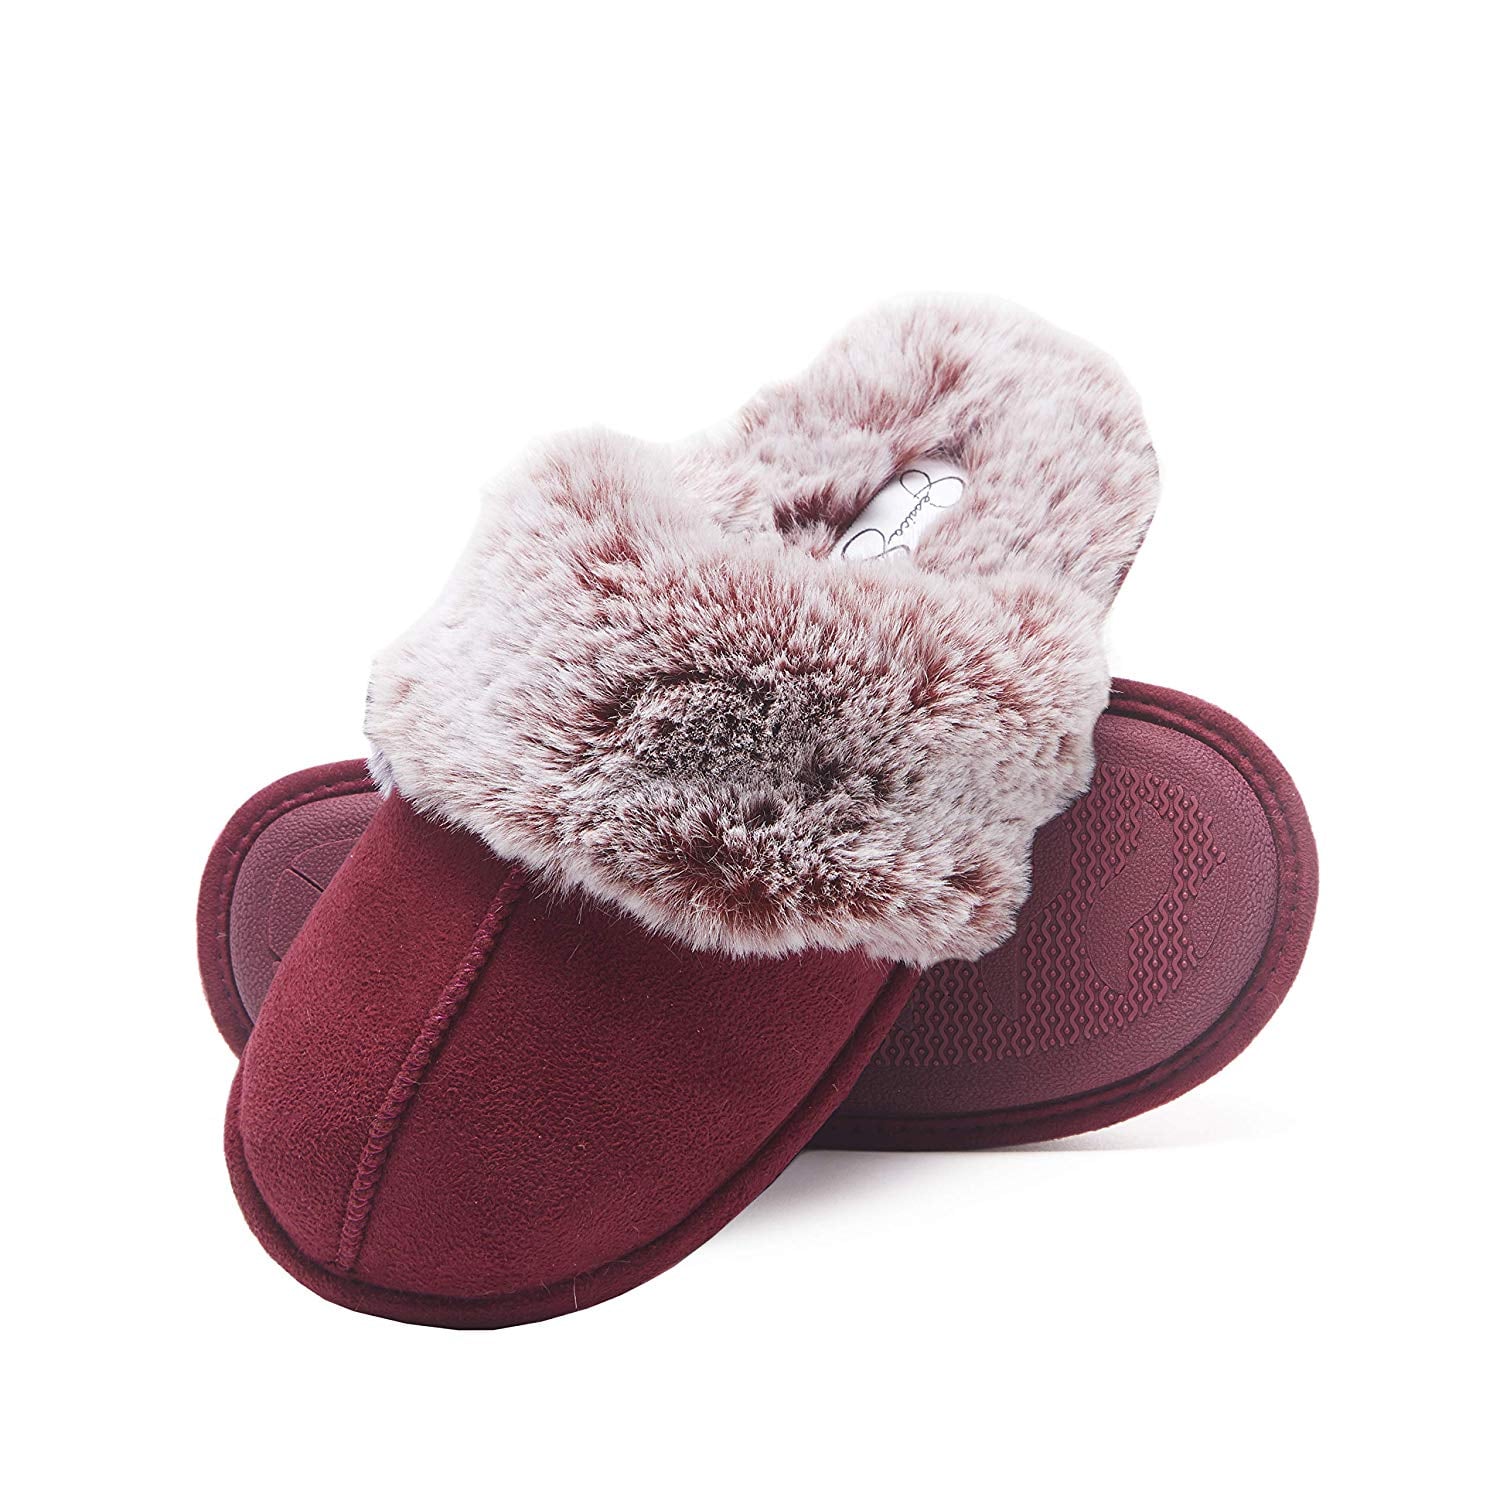 cyber monday slippers